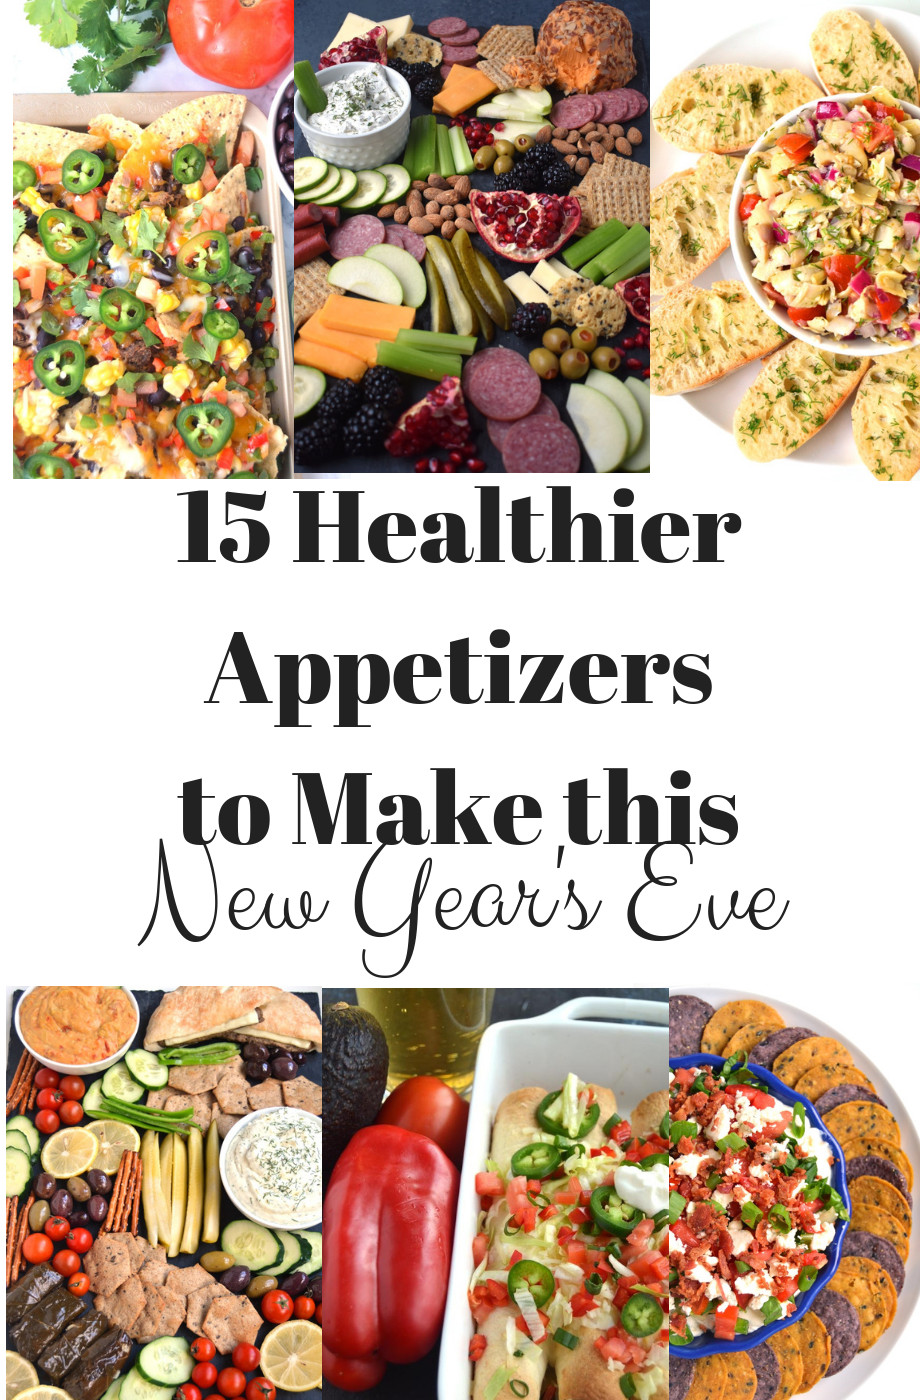 Healthy New Year'S Eve Appetizers
 15 Healthier Appetizers to Make this New Year s Eve